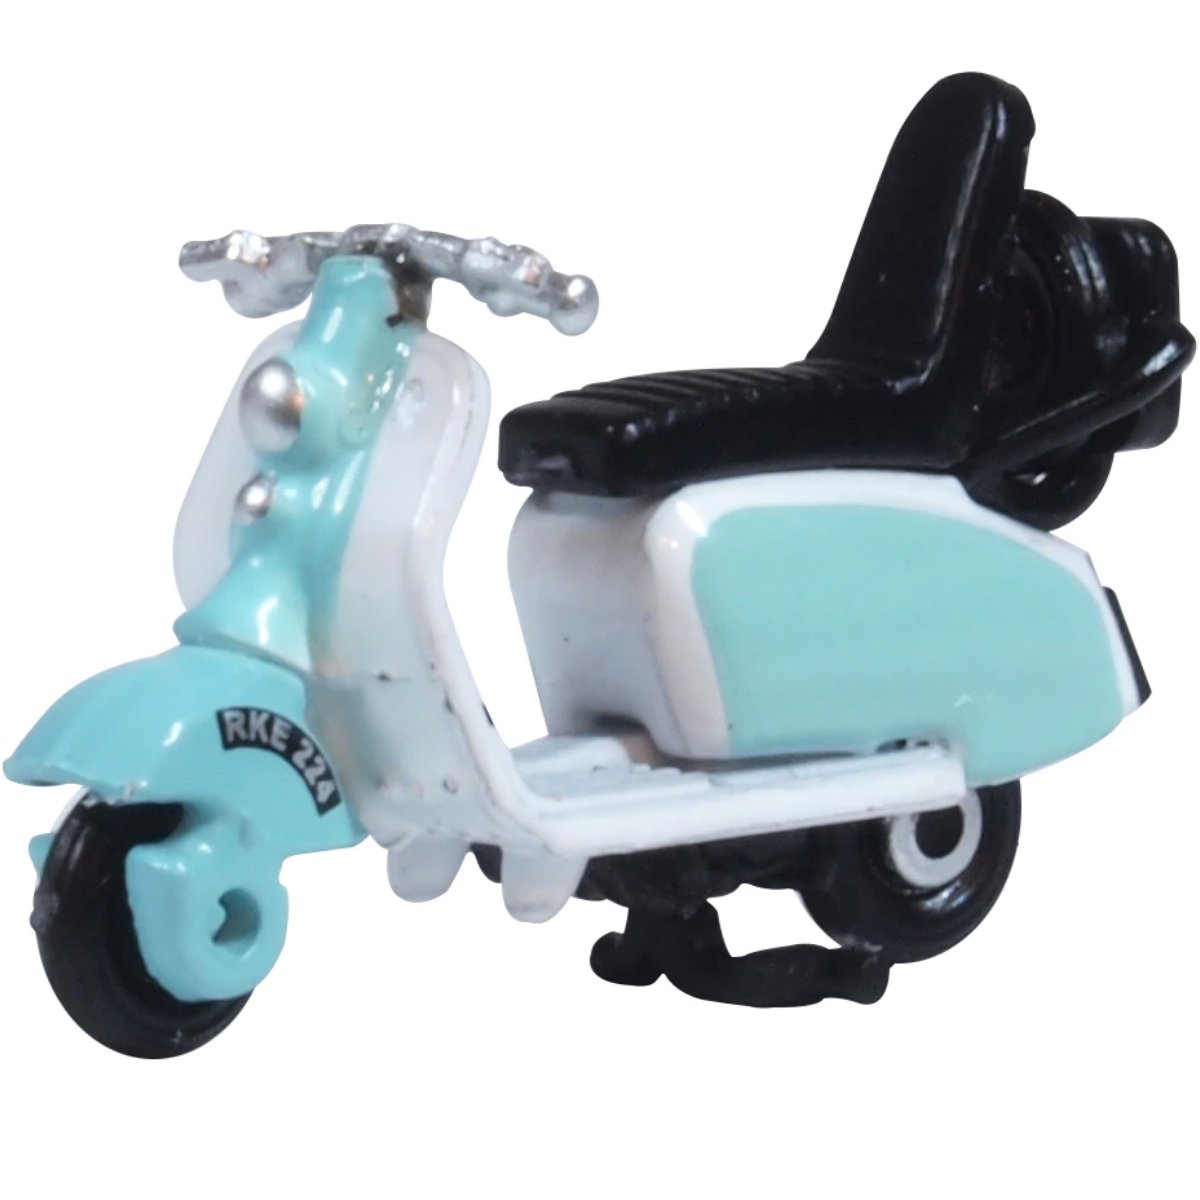 Oxford Diecast 76SC001 Scooter Blue & White - Phillips Hobbies